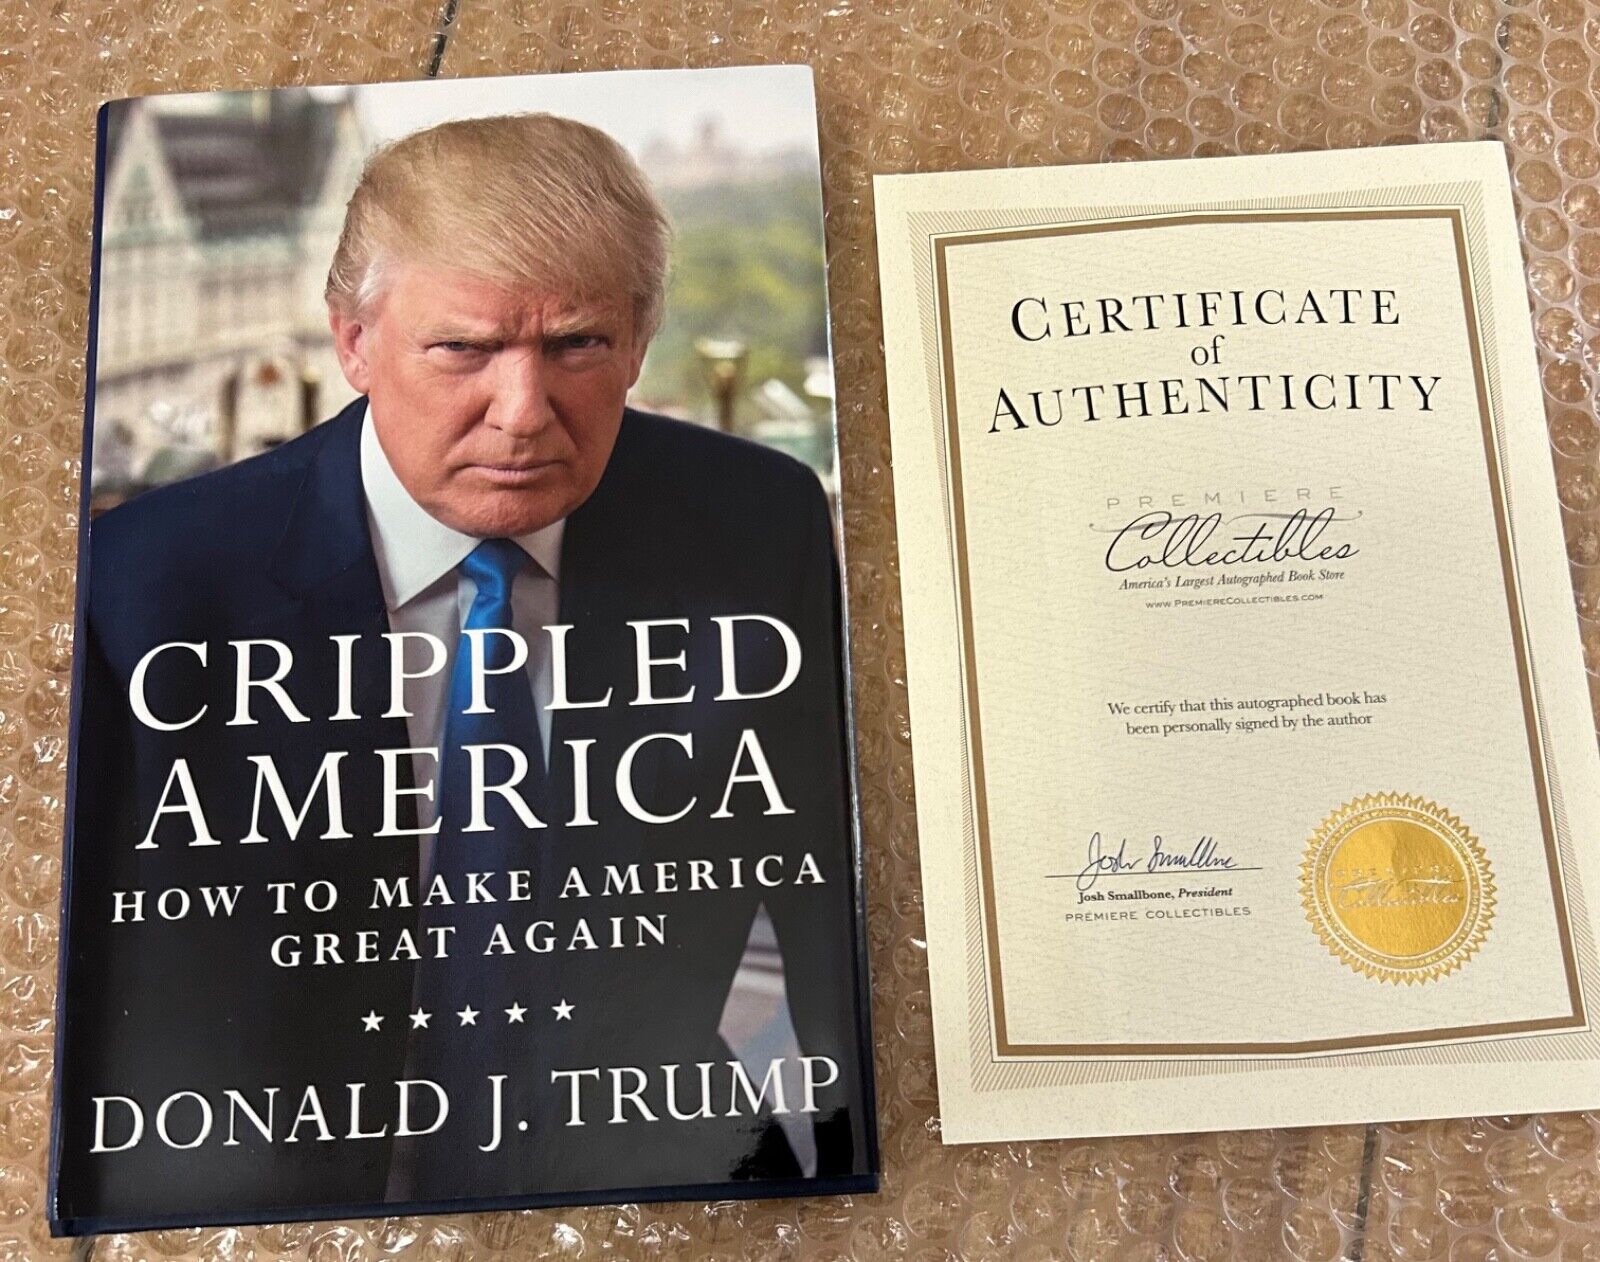 “Crippled America” by Donald J. Trump, COA, First Edition and number 393/10,000